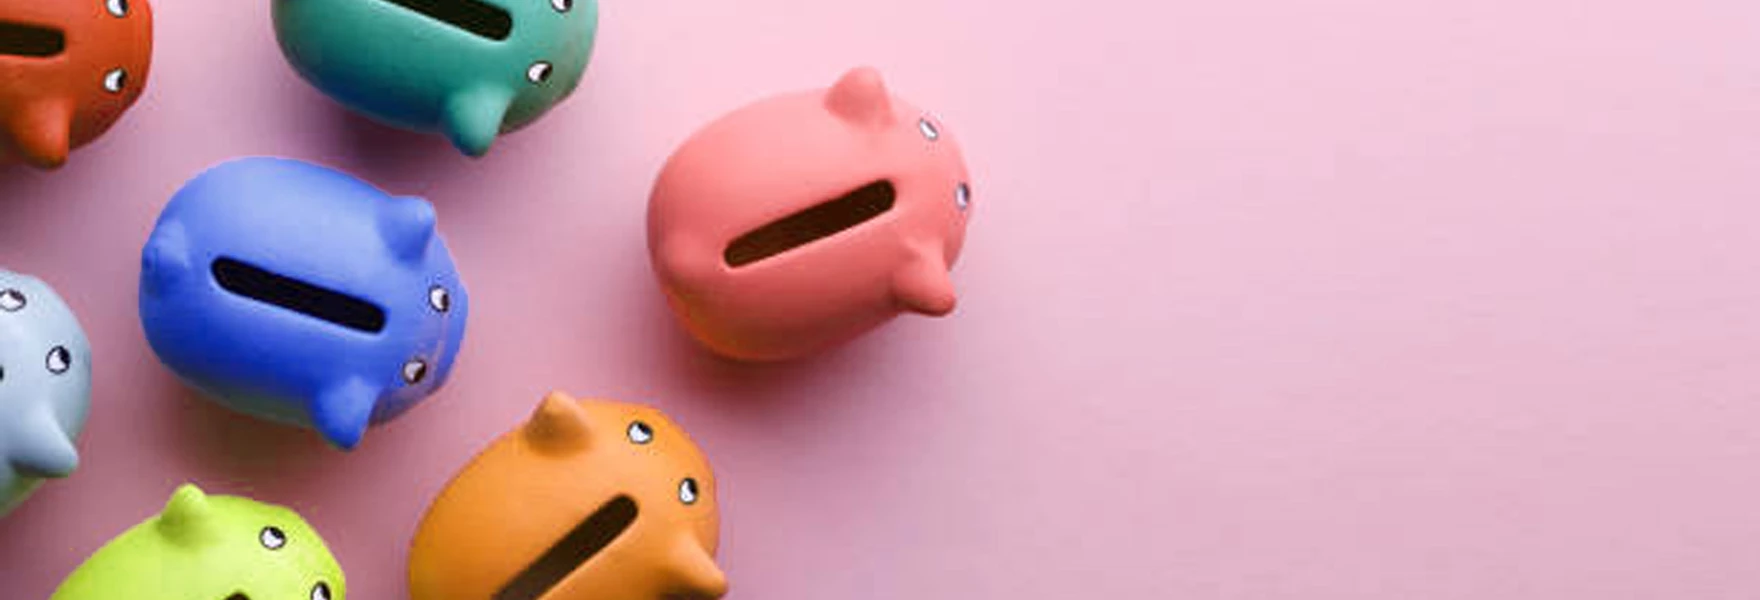 Colorful Piggy Banks Picture Id1169479391 